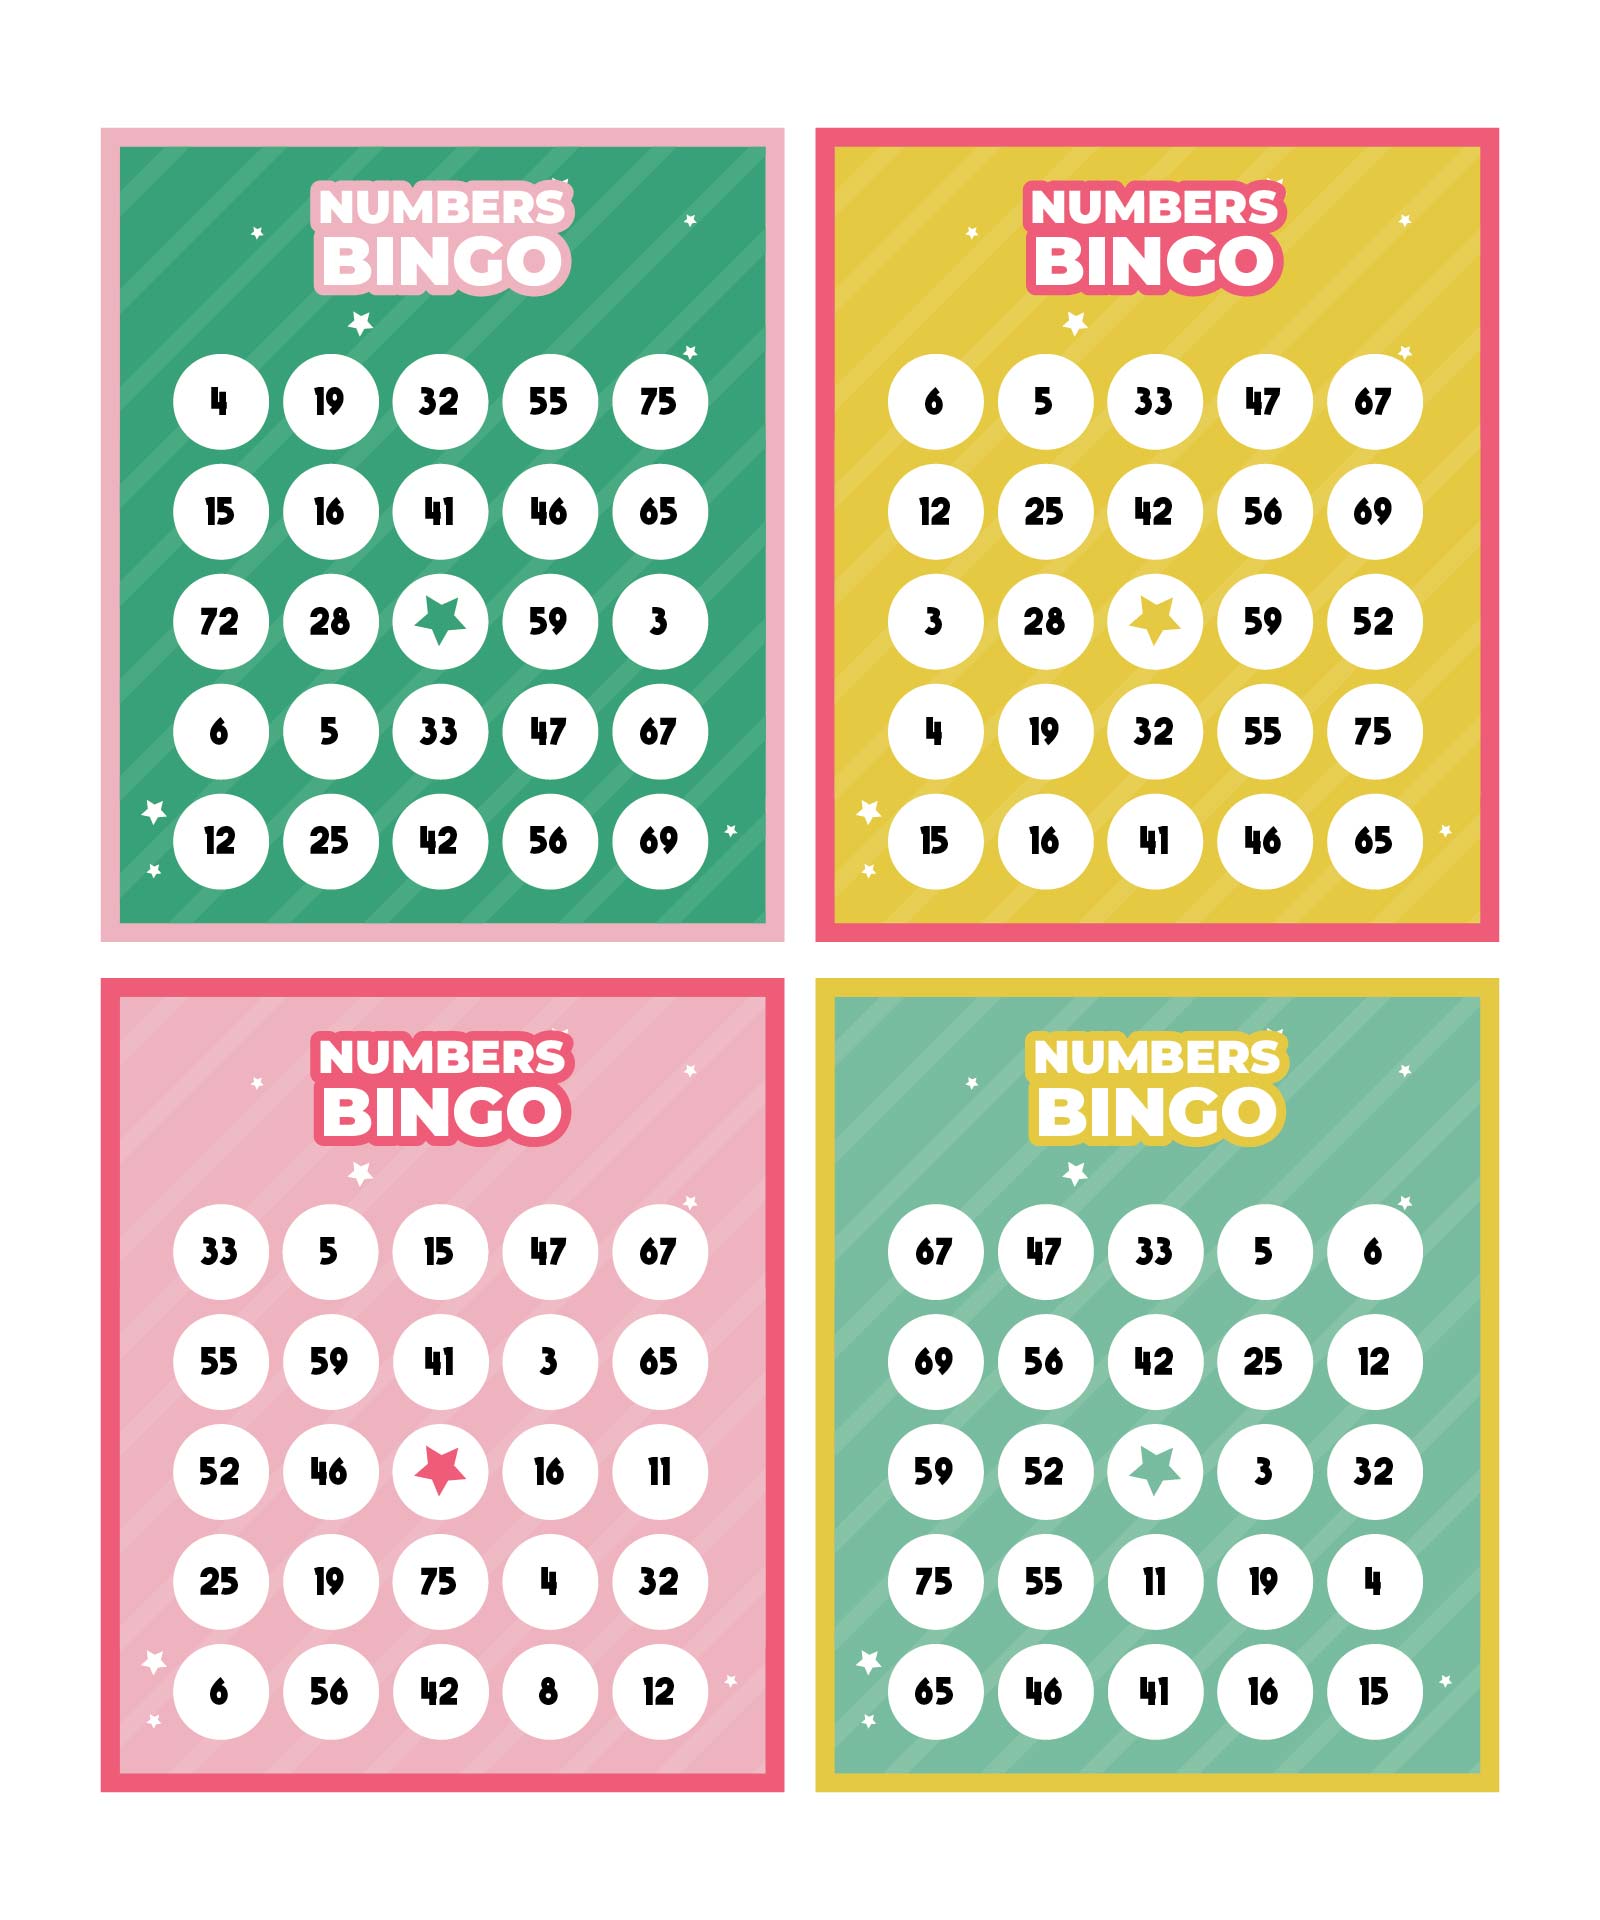 Bingo Cards To Print For Free With Numbers